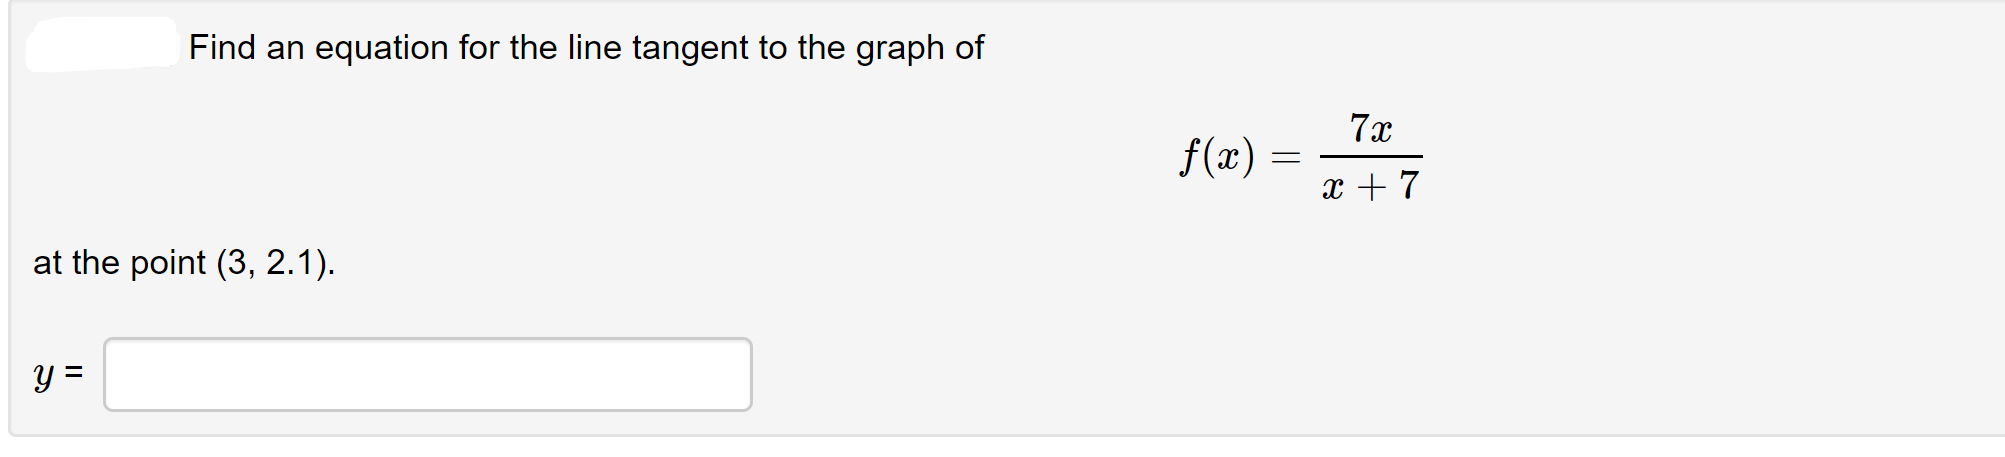 Find an equation for the line tangent to the graph of
7x
f(x) =
x + 7
at the point (3, 2.1).
y =
